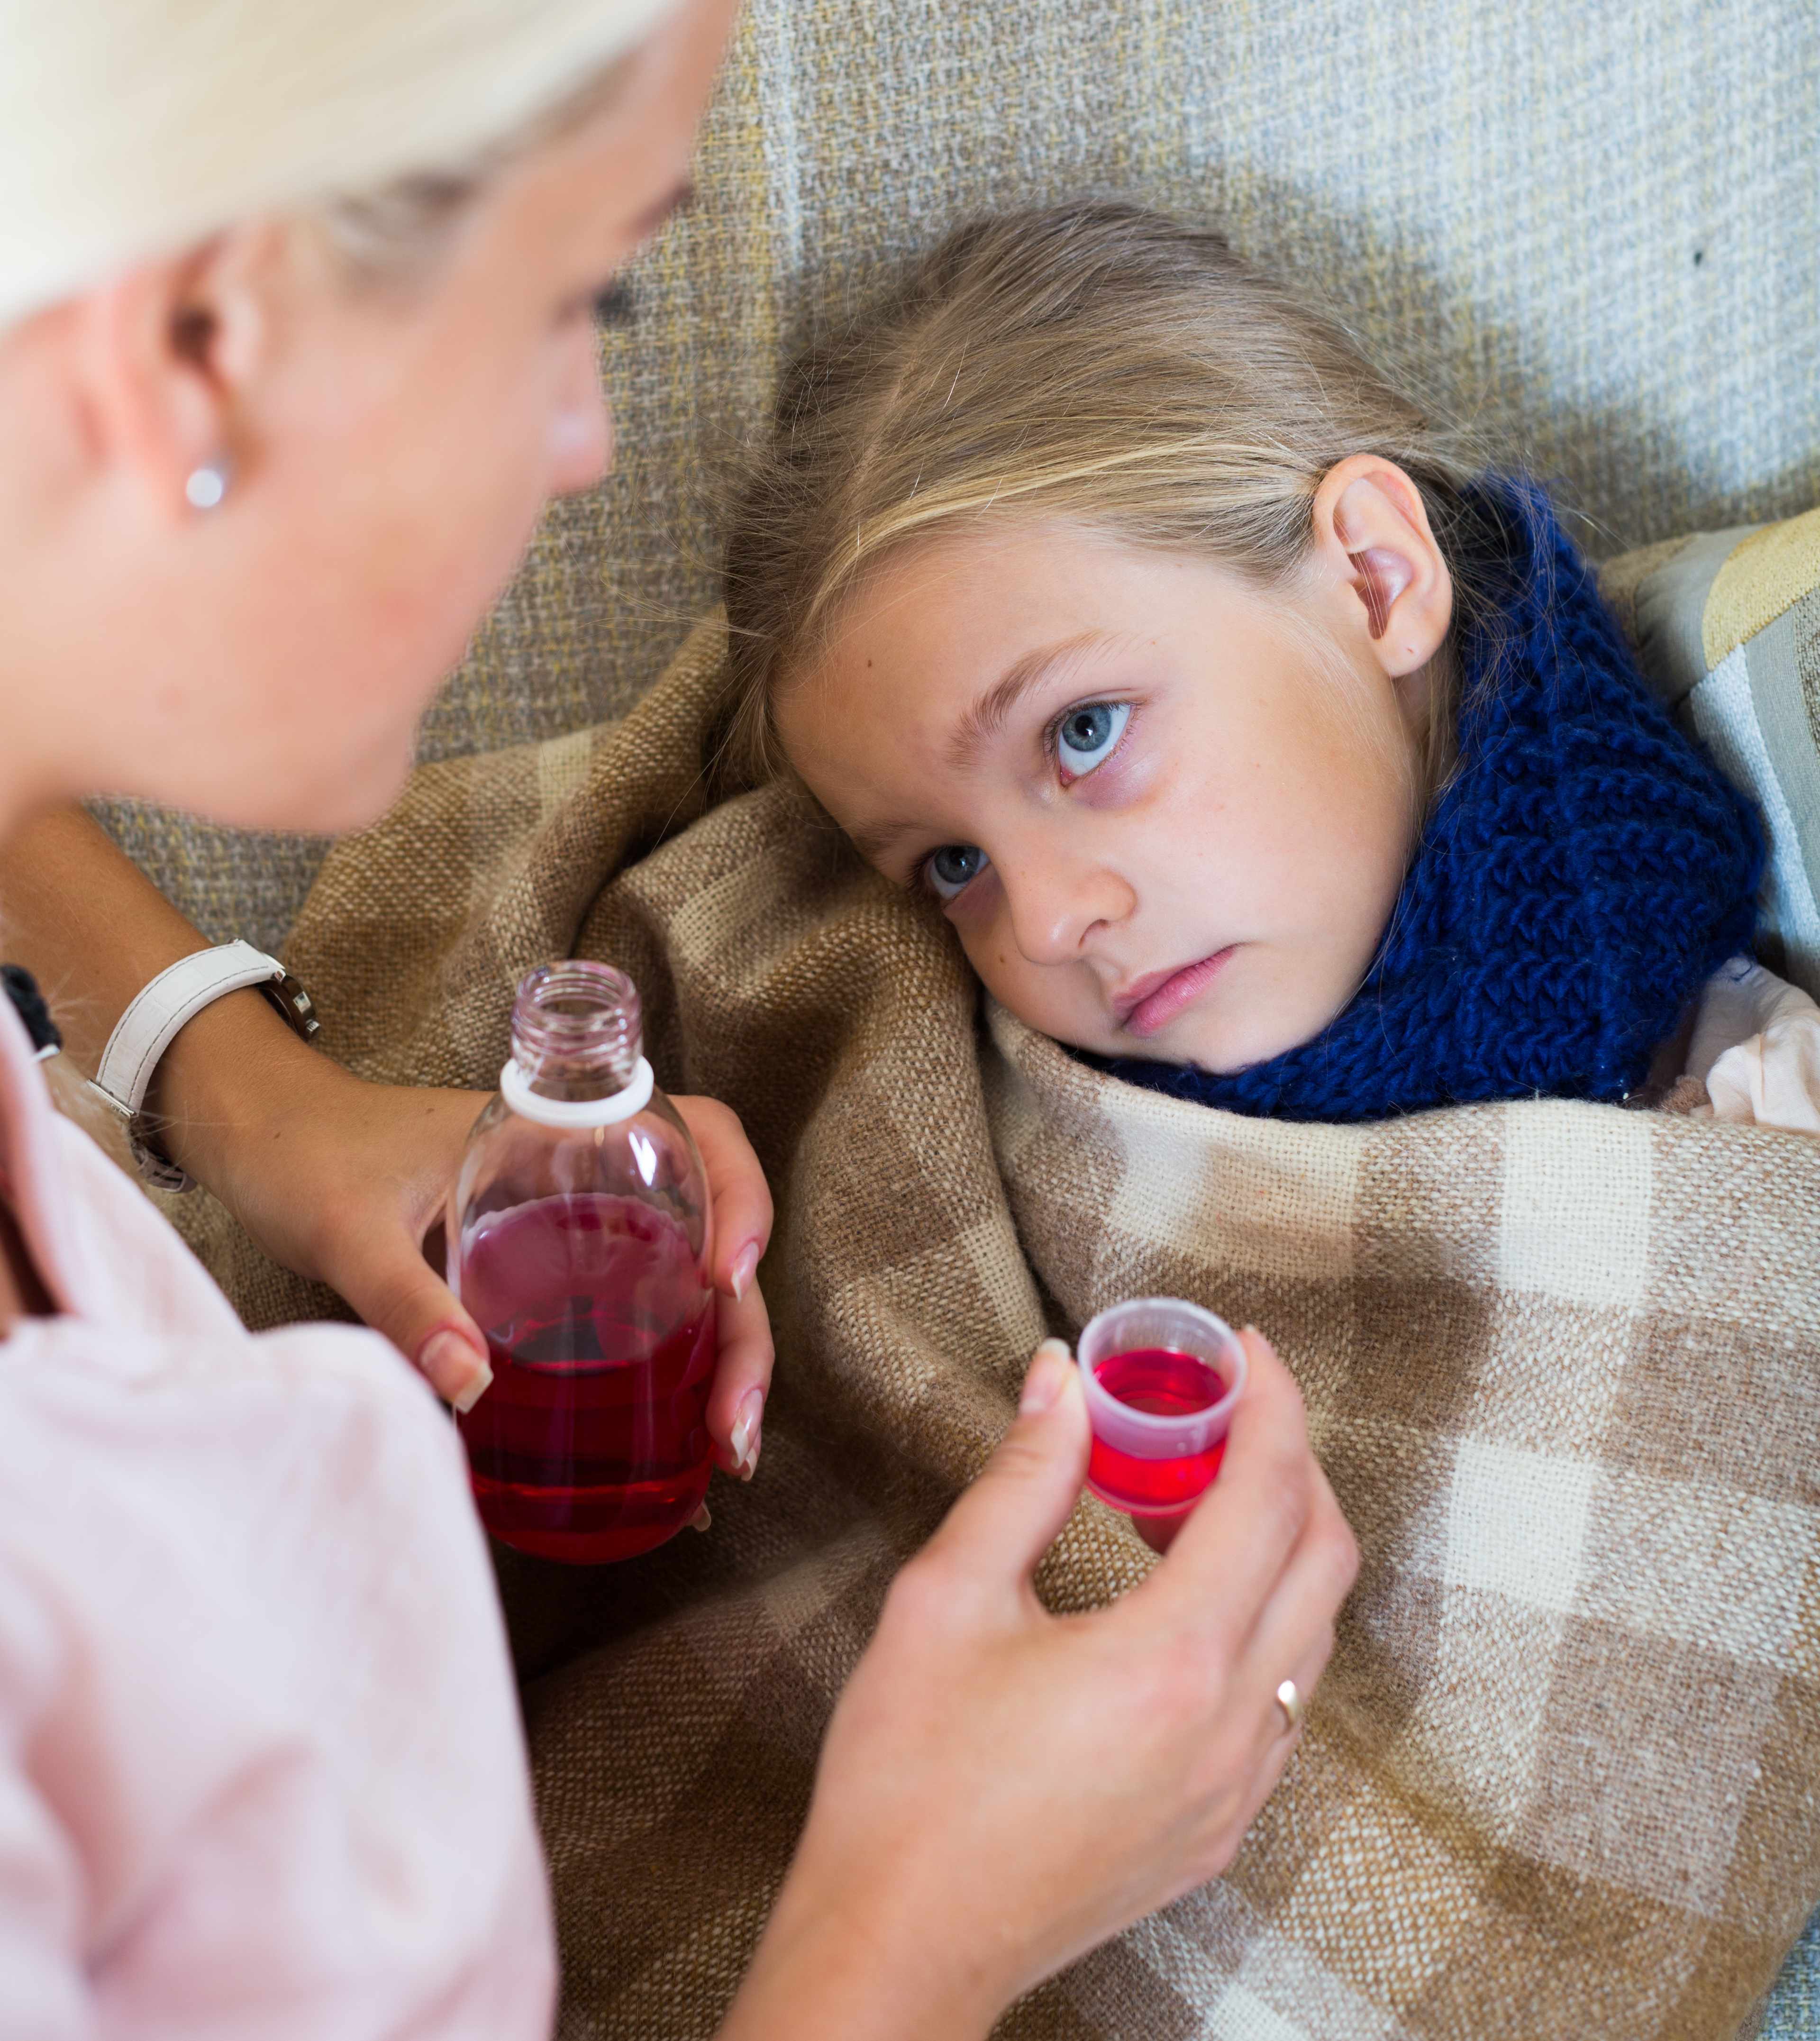 a little girl looking sick and sad with adult trying to give her cough medicine